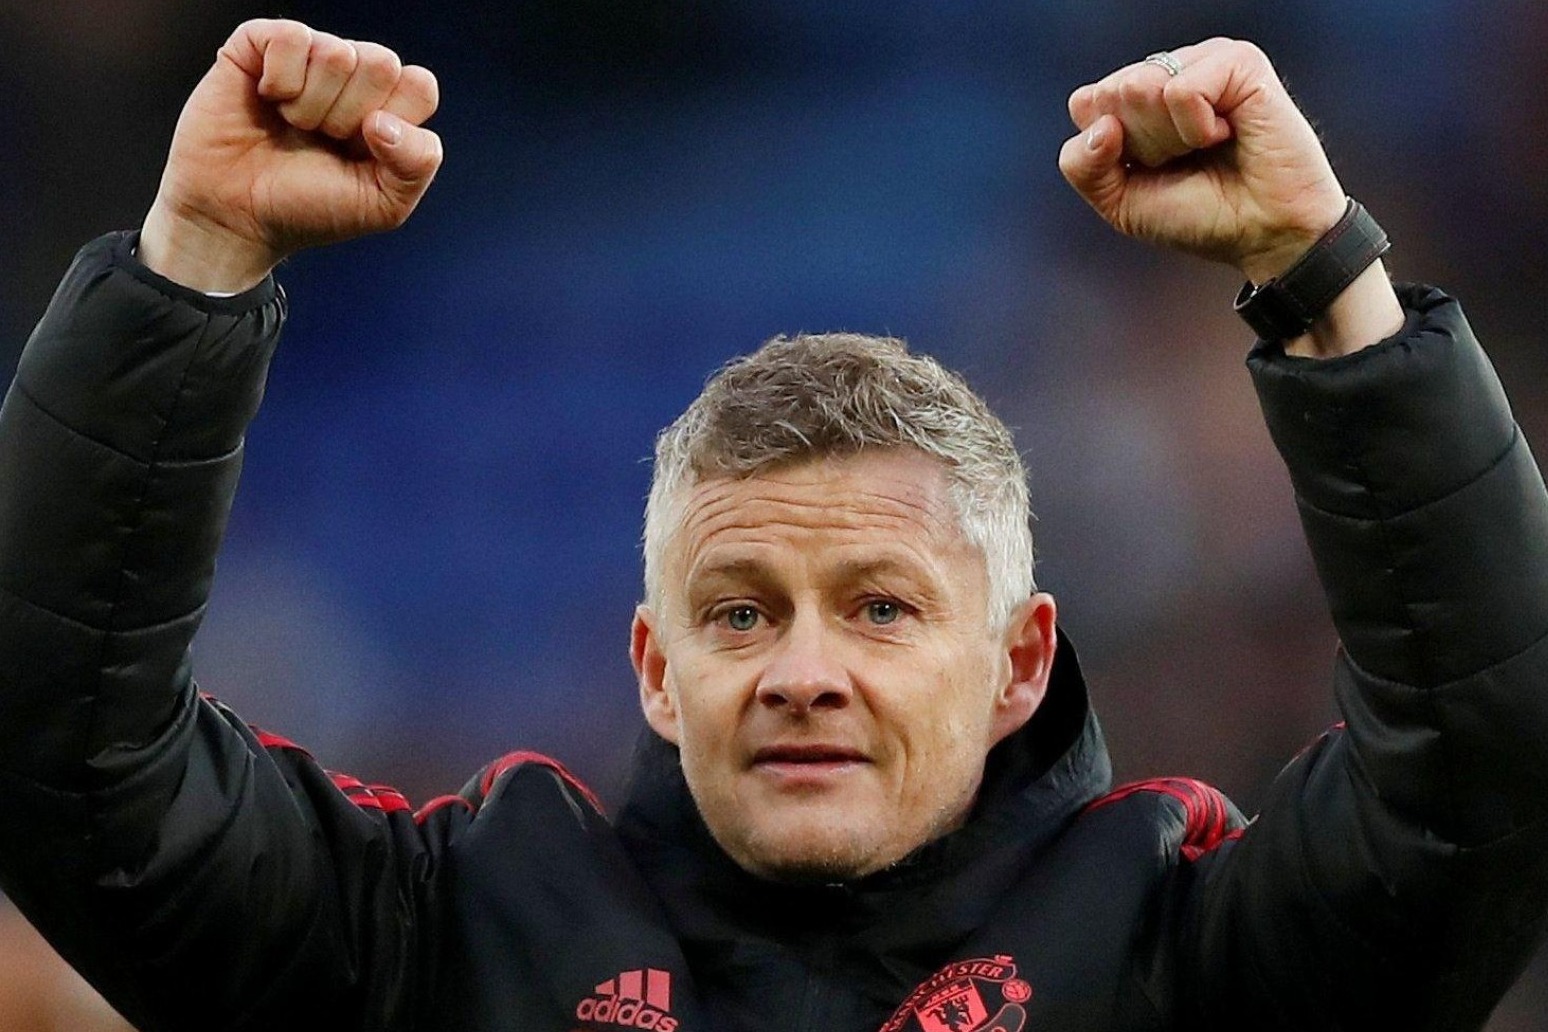 Ole Gunnar Solskjaer ’embarrassed’ by Man Utd form but not drawn on his future 